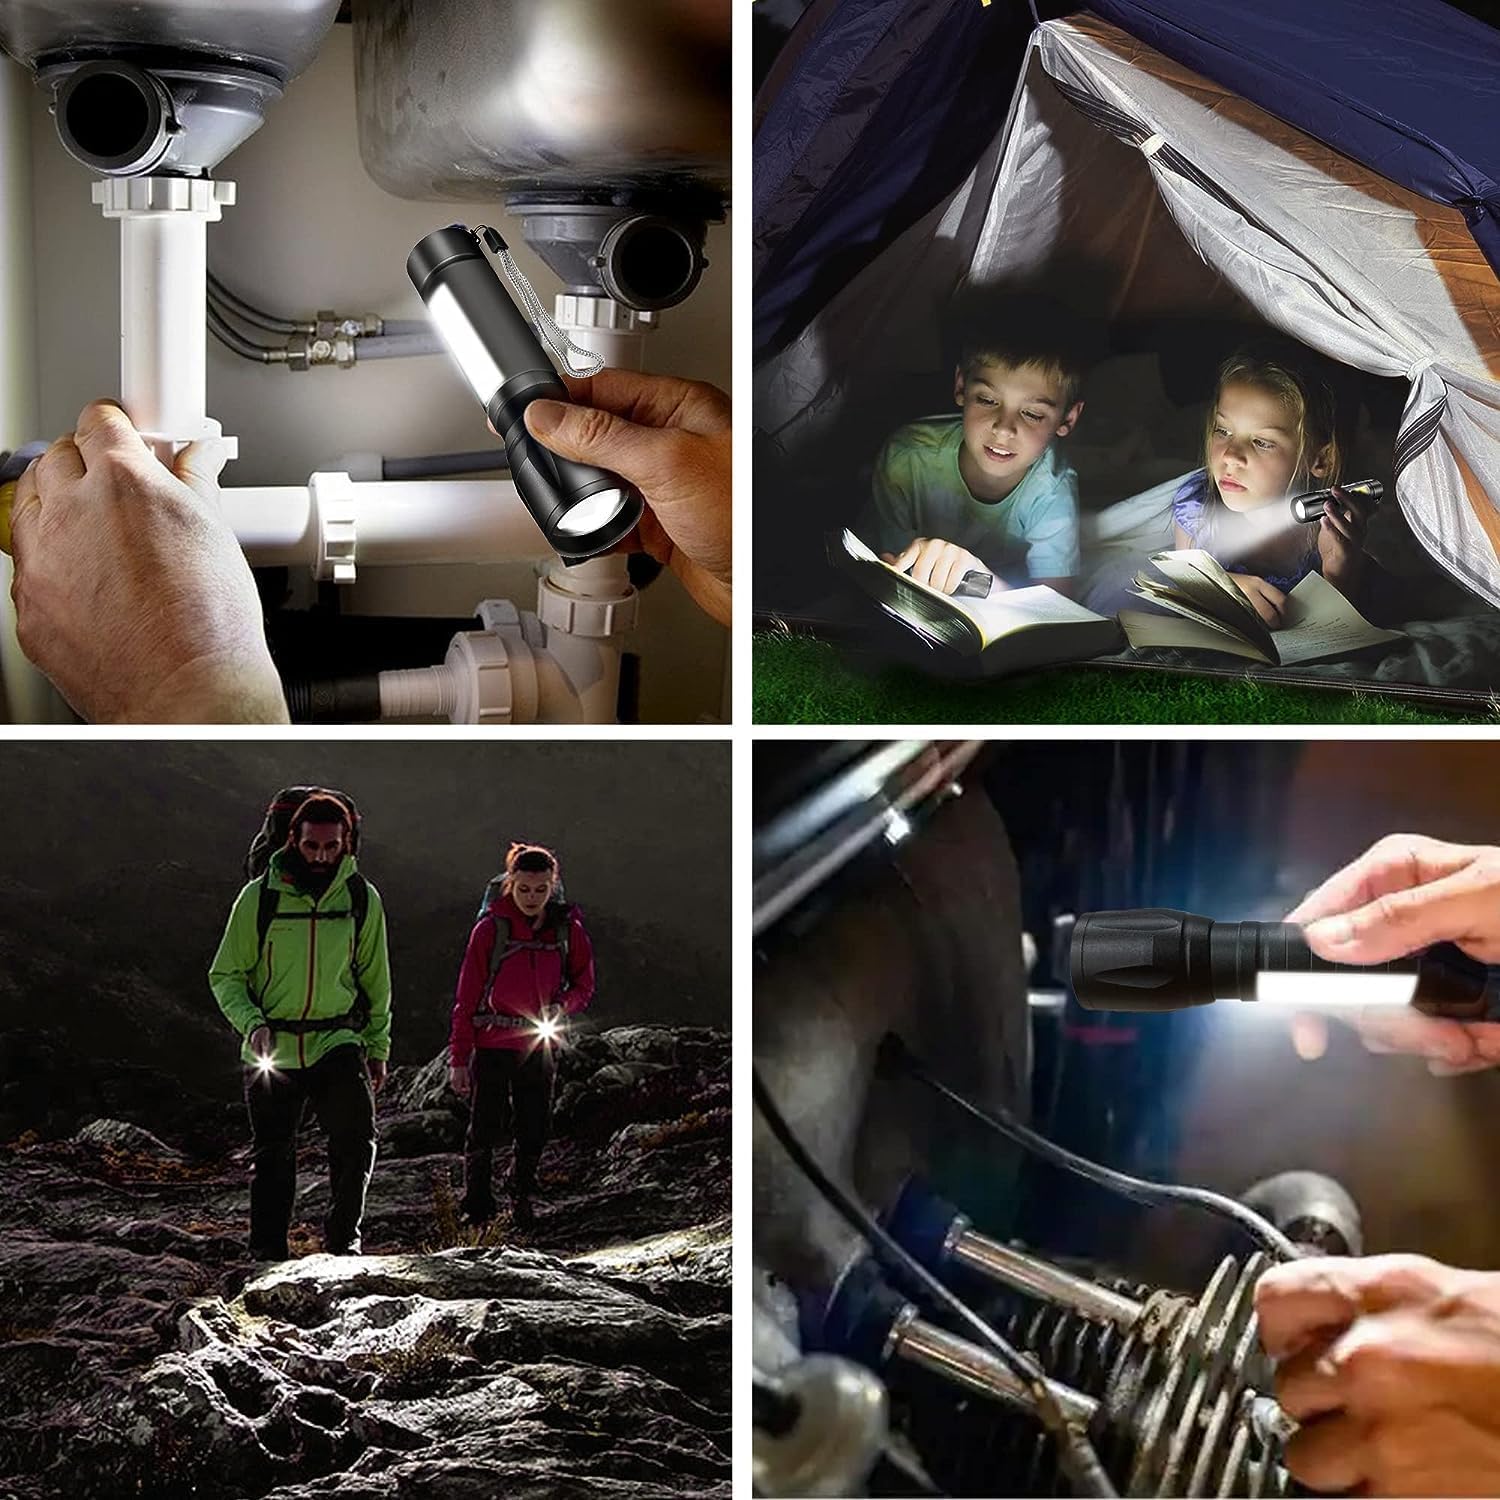 Dunamis LED Torch Rechargeable, Super Bright Adjustable Focus Flashlight, 3 Lighting Modes, Long Battery Life, Waterproof Pocket Size Lamp for Emergency, Camping, Hiking, Outdoor (Pack of 2 Torches)           [Energy Class A+++]